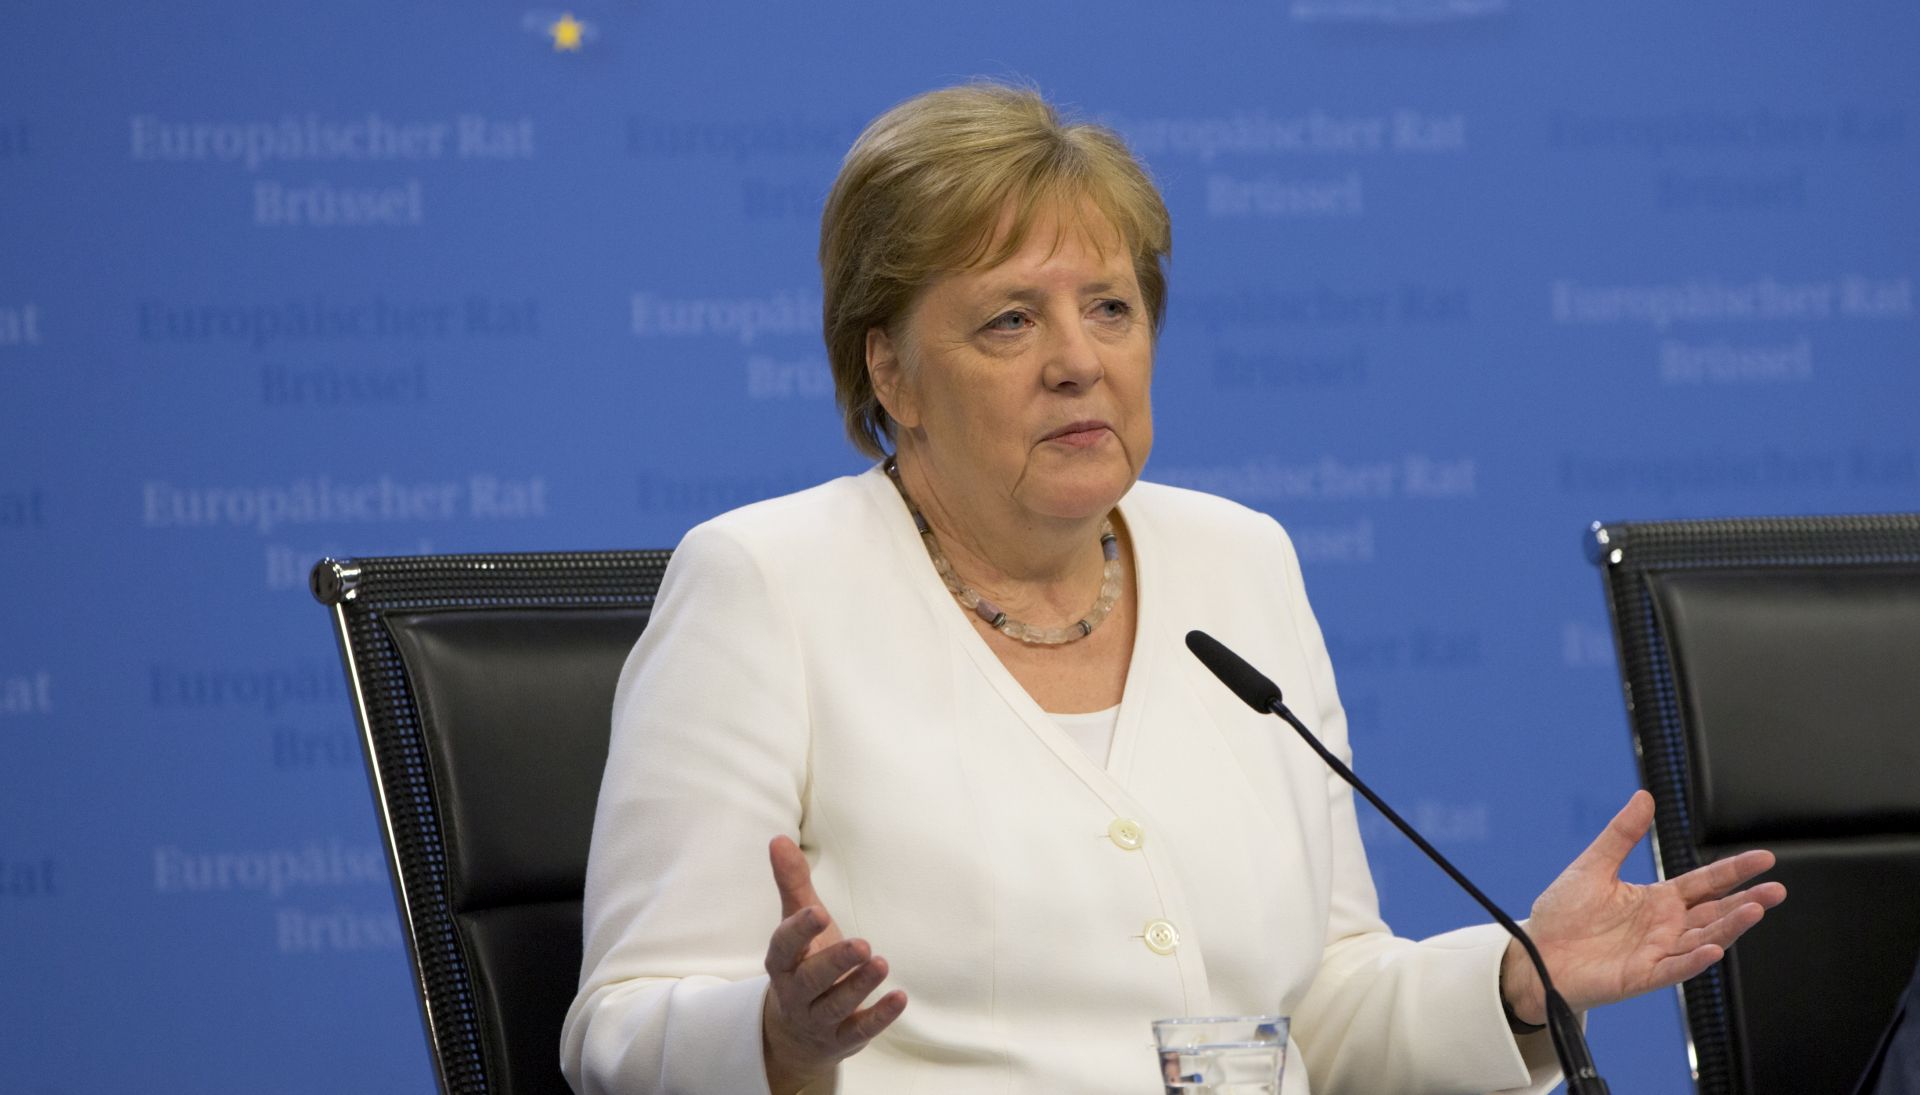 epa07687030 German Chancellor Angela Merkel (during a Special European Council in Brussels, Belgium, 01 July 2019. Heads of states or governments from the EU are continuing discussions on the possible candidates for the heads of EU institutions, namely European Council President, President of the European Commission, High Representative of the Union for Foreign Affairs and Security Policy (Foreign Policy Chief), and President of the European Central Bank.  EPA/OLIVIER HOSLET